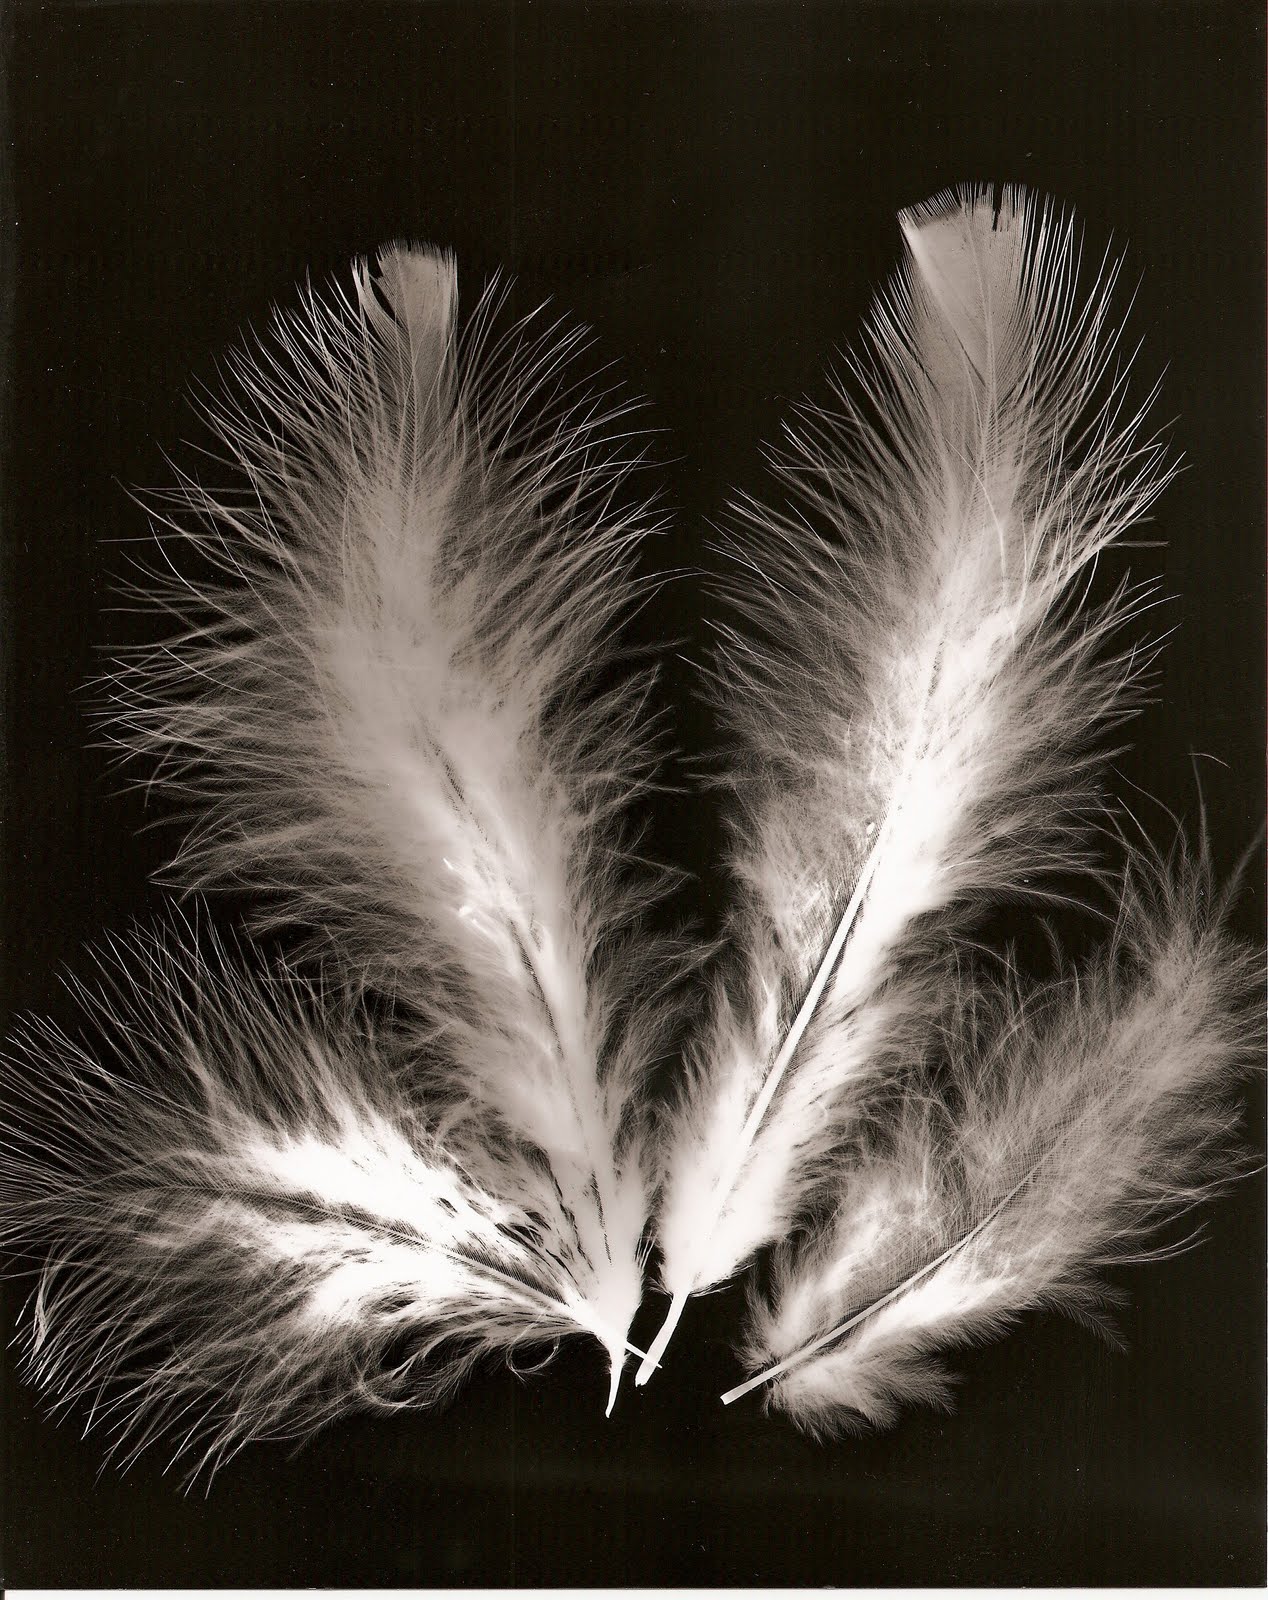 My Photography Blog: Feathers